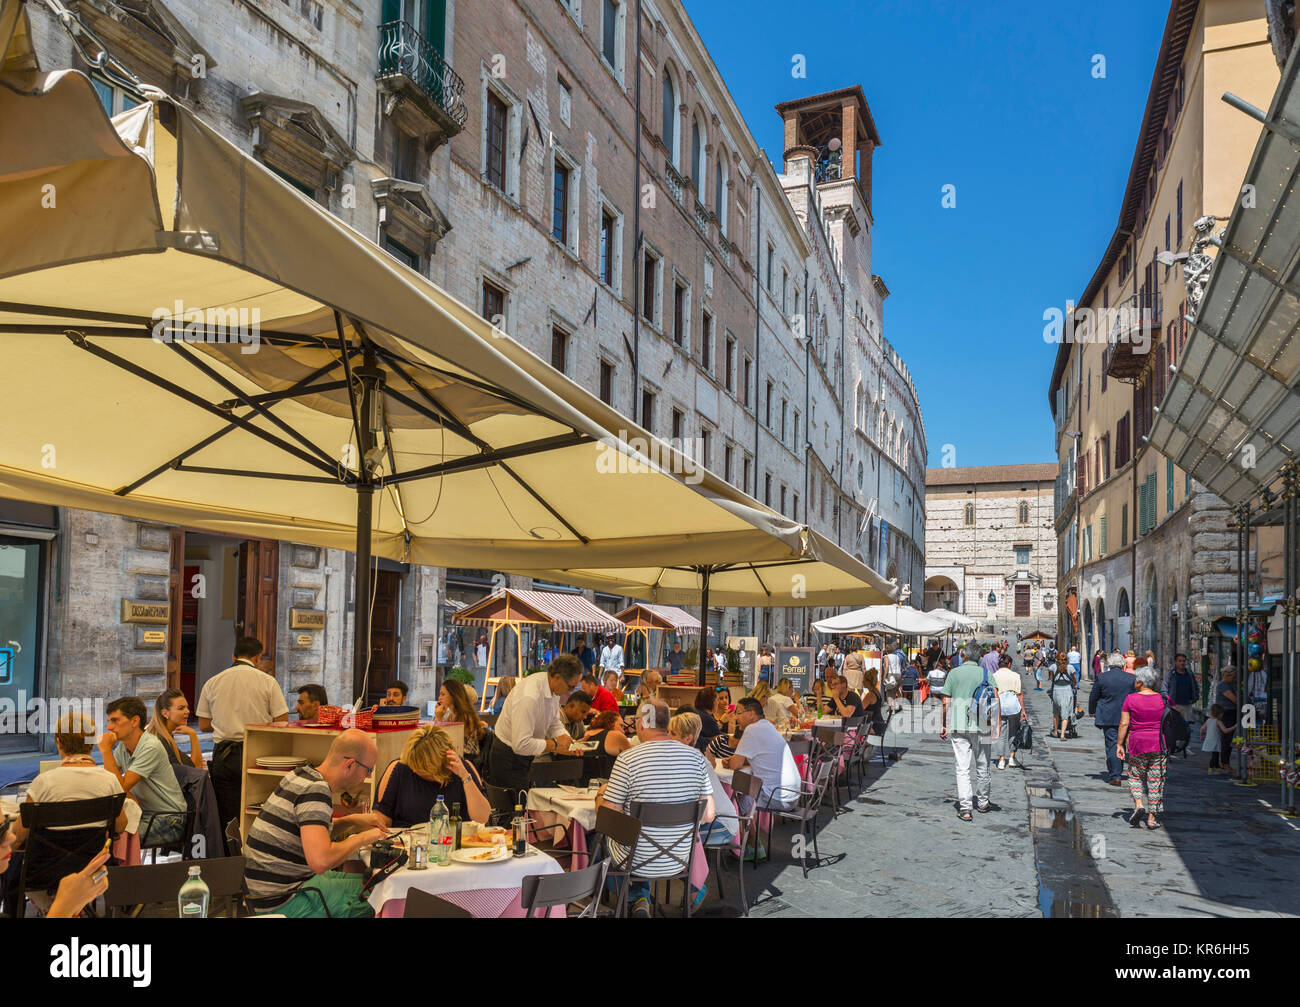 Sidewalk cafes, restaurants and shops on the Corso Pietro Vannucci in the old town centre, Perugia, Umbria, Italy Stock Photo